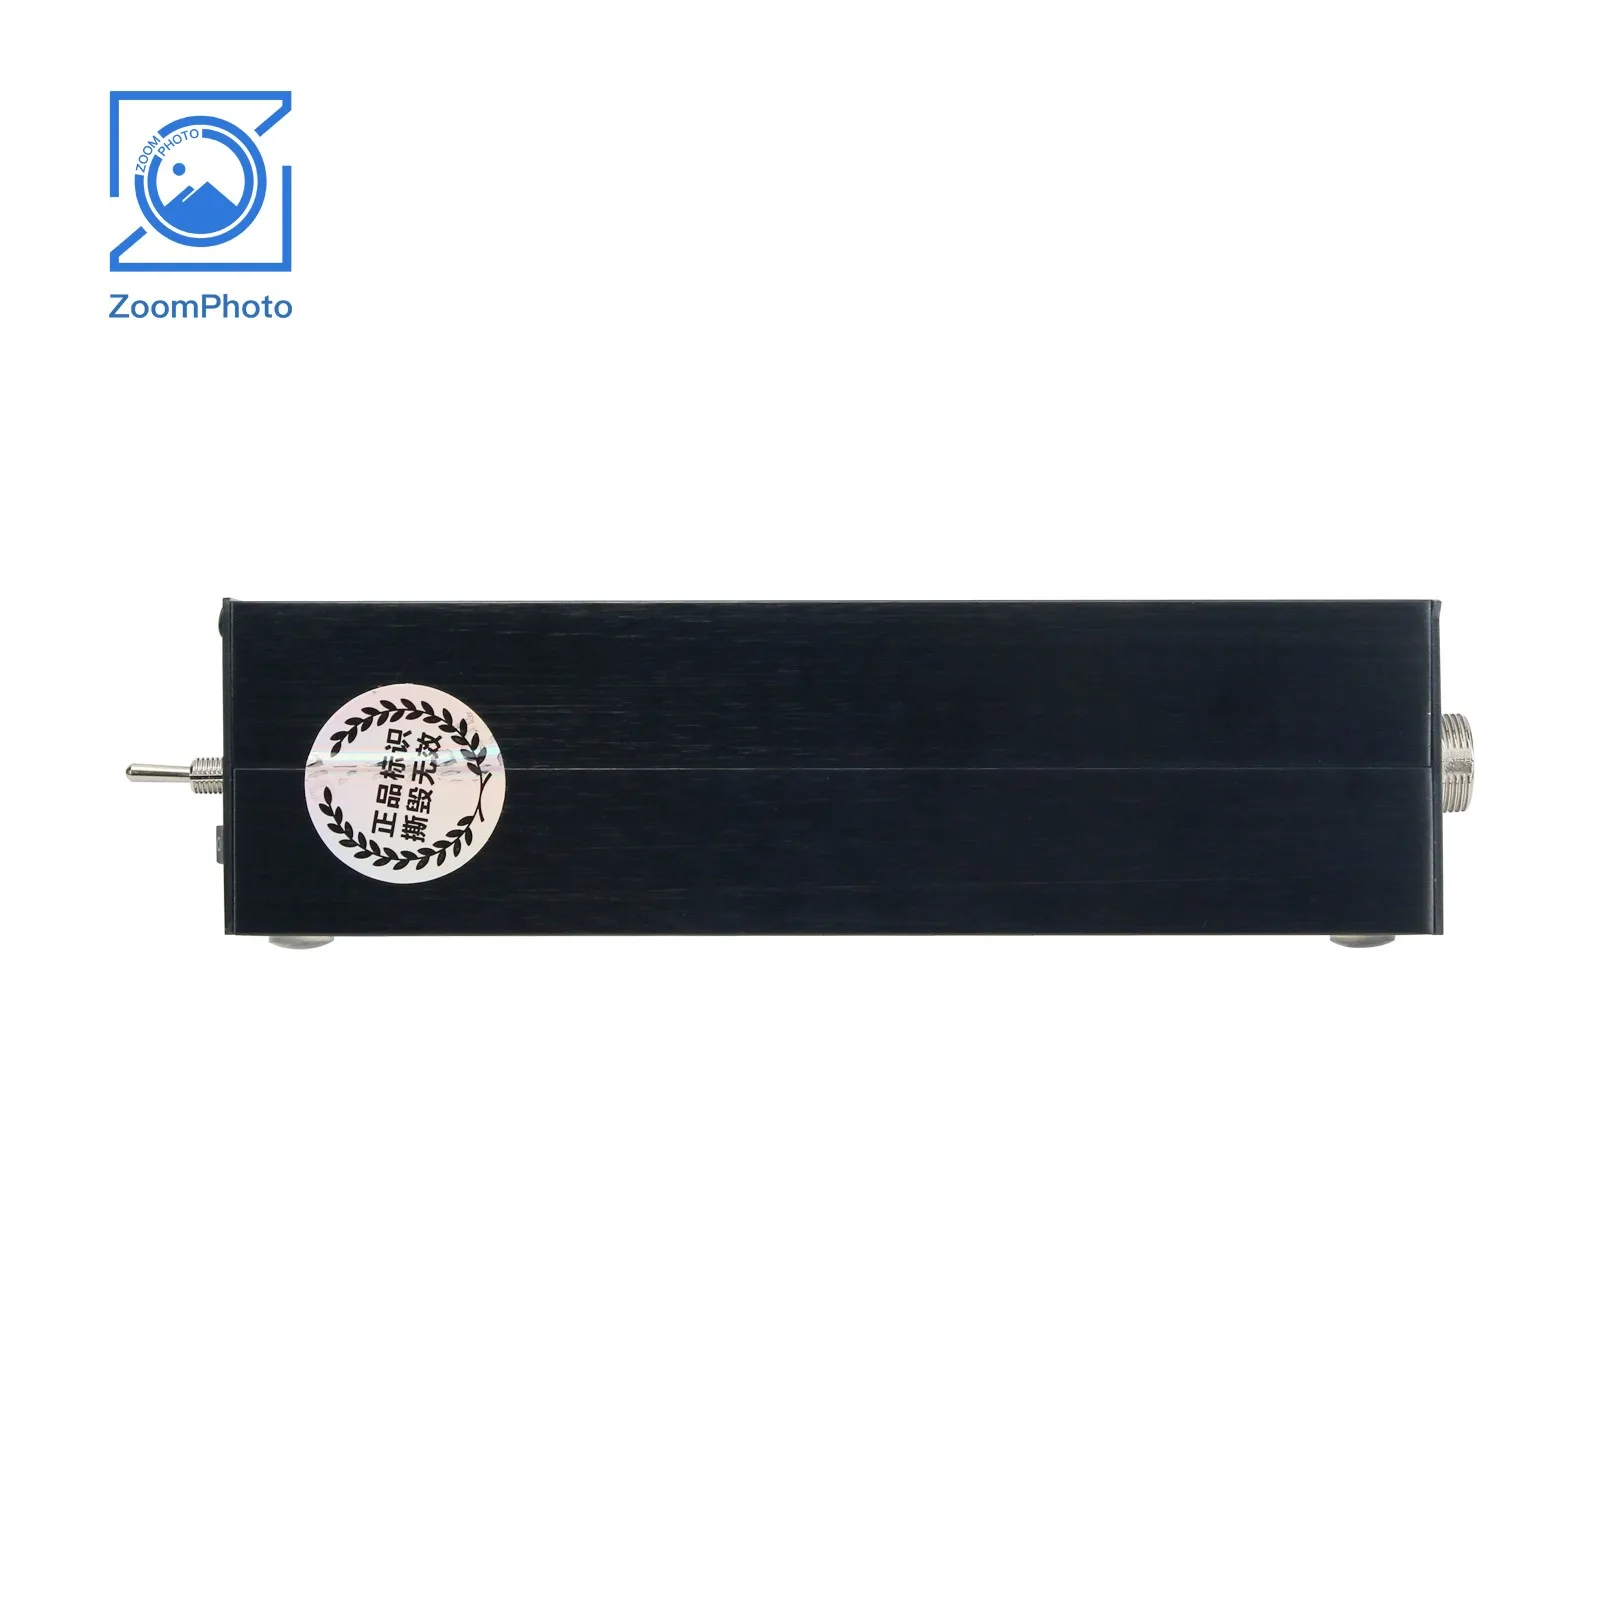 XDT-PA100X 120W 1.8MHz to 30MHz HF Power Amplifier Module Suitable for G90S HF Transceiver